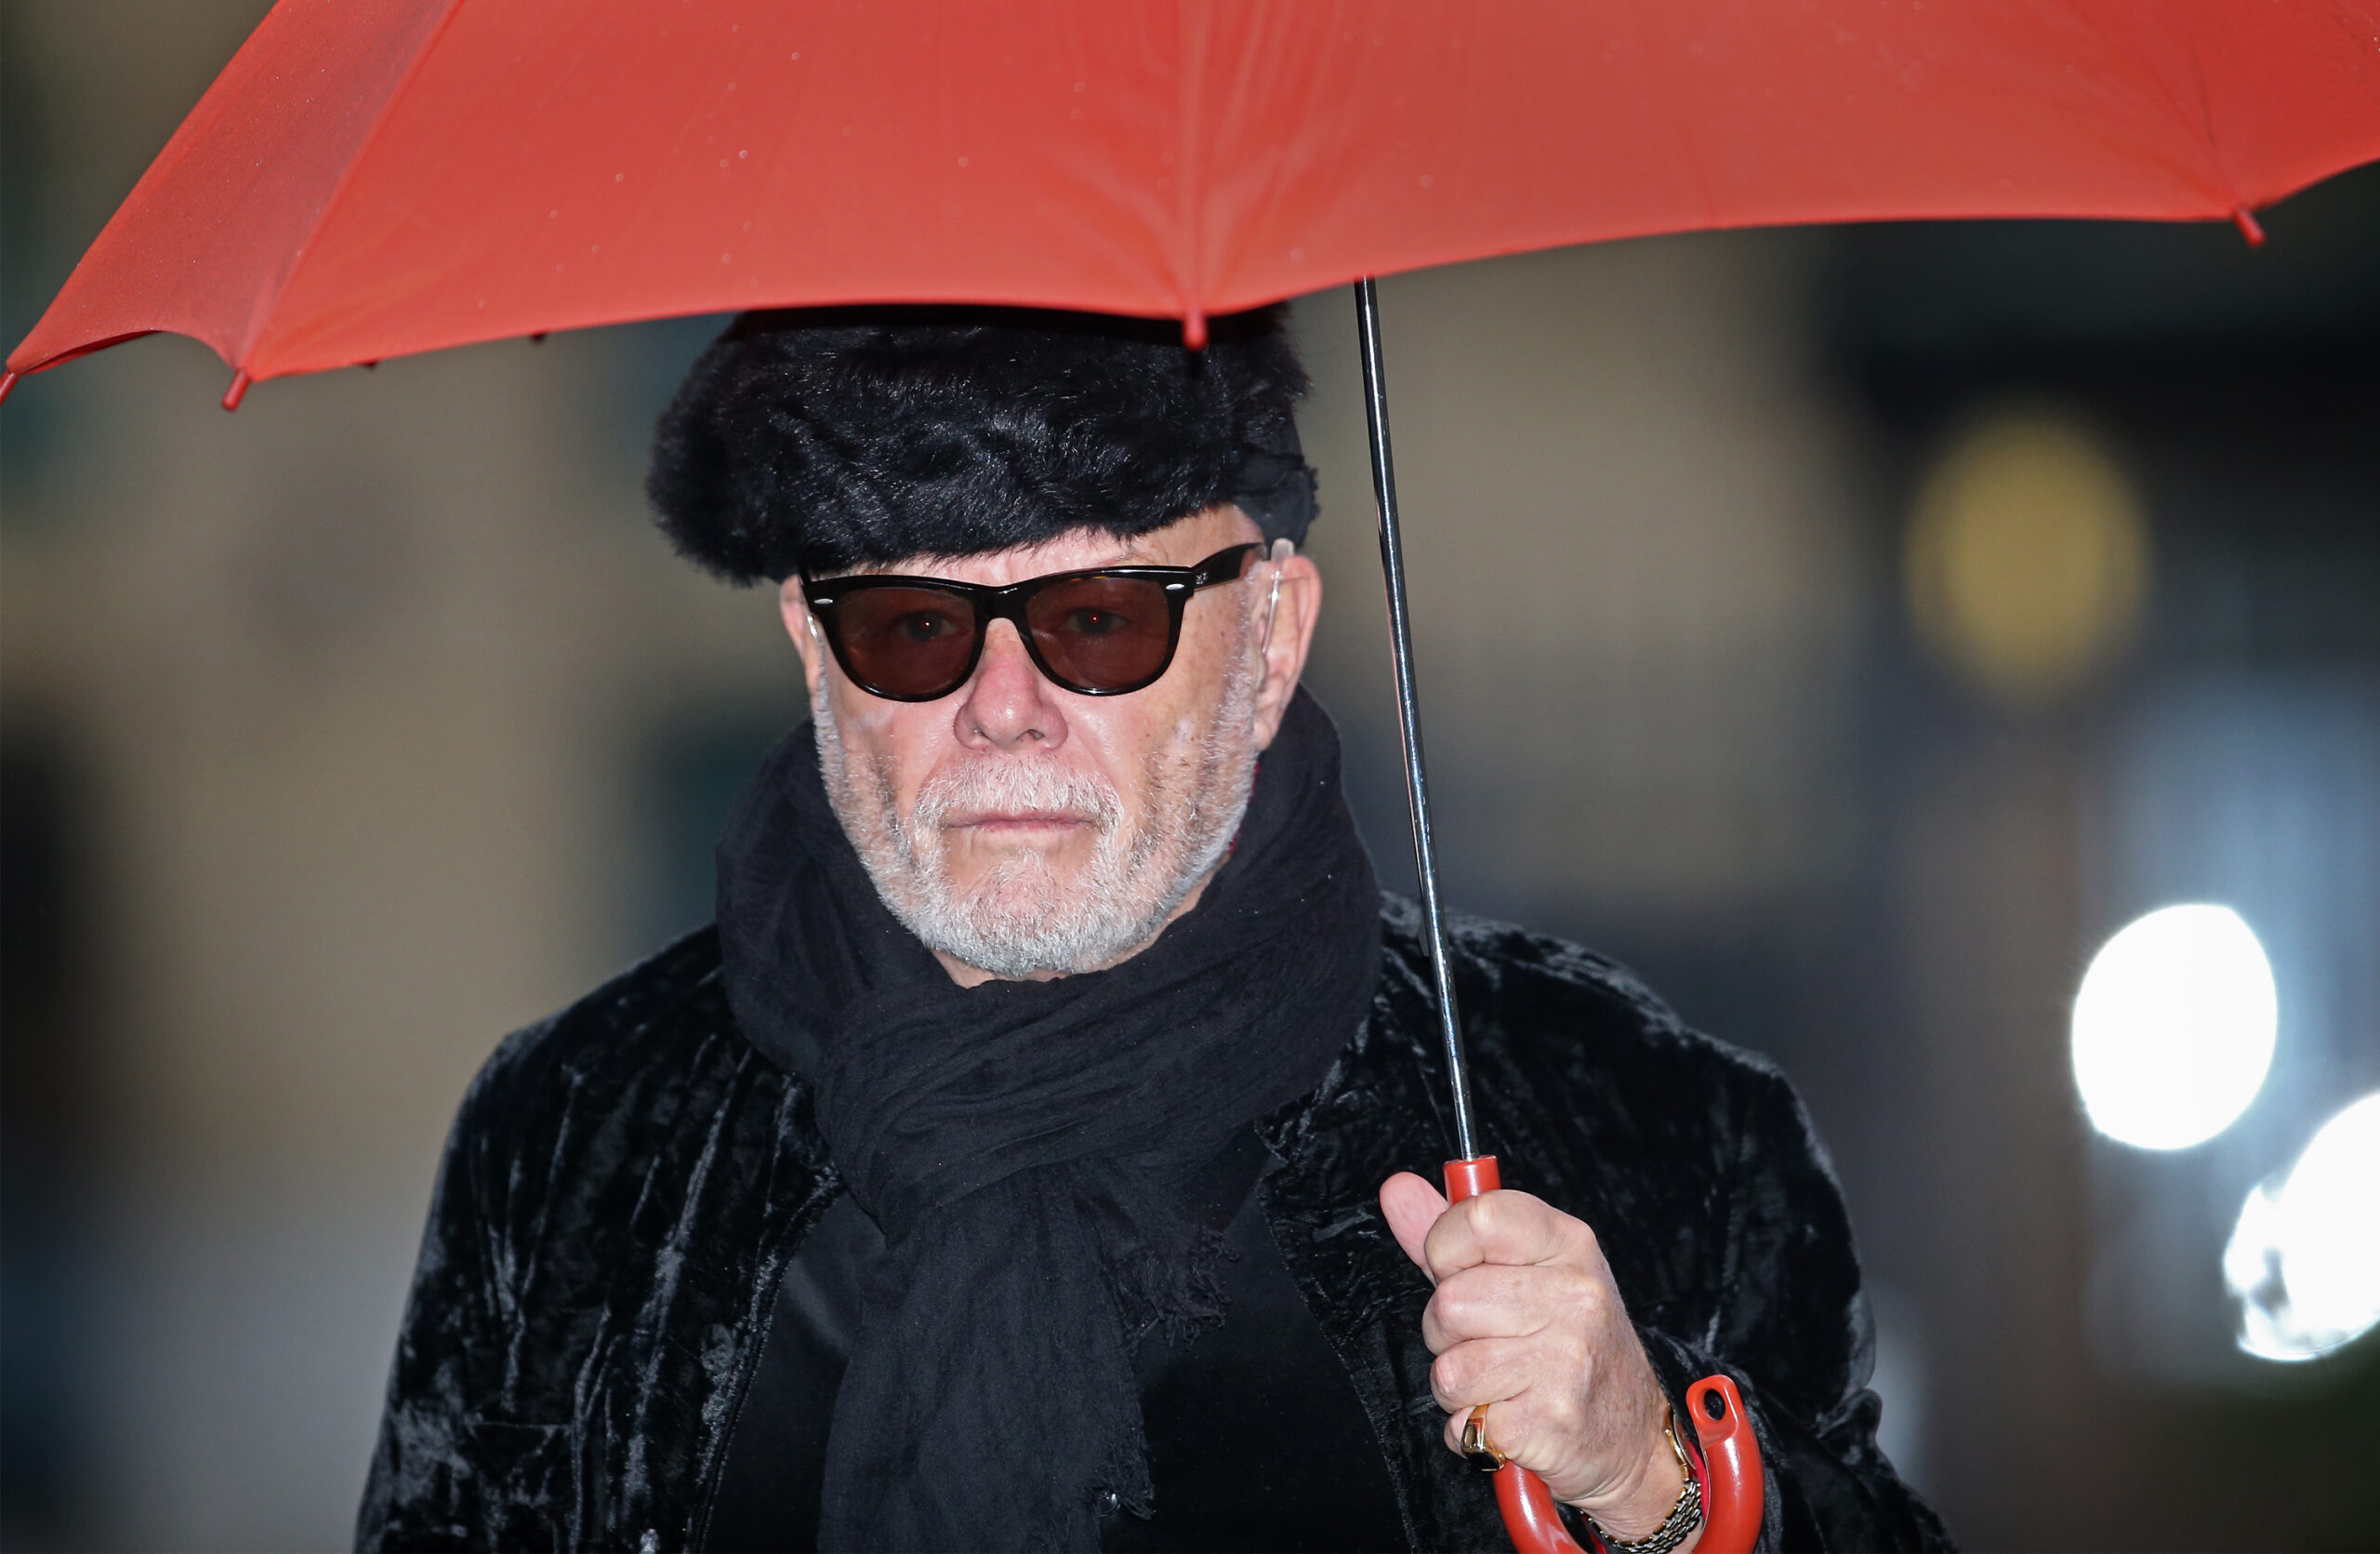 Gary Glitter in 2015 (Photo: Peter Macdiarmid / Getty Images)